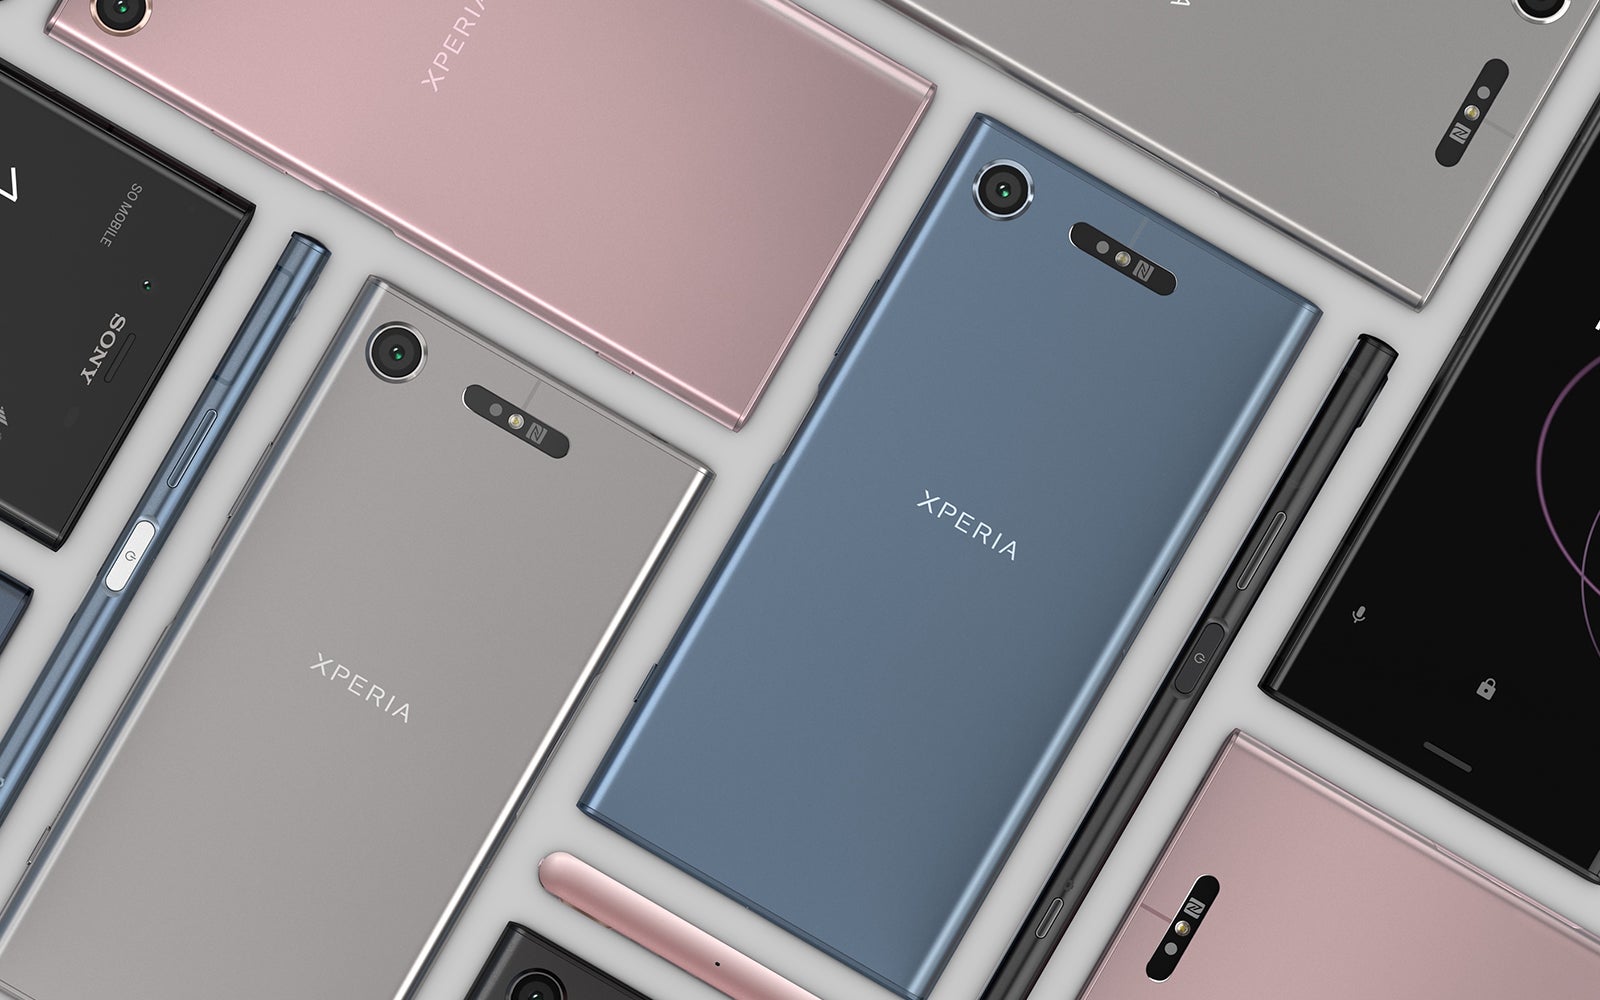 Sony unveils the Xperia XZ1: Same old looks, wild new features